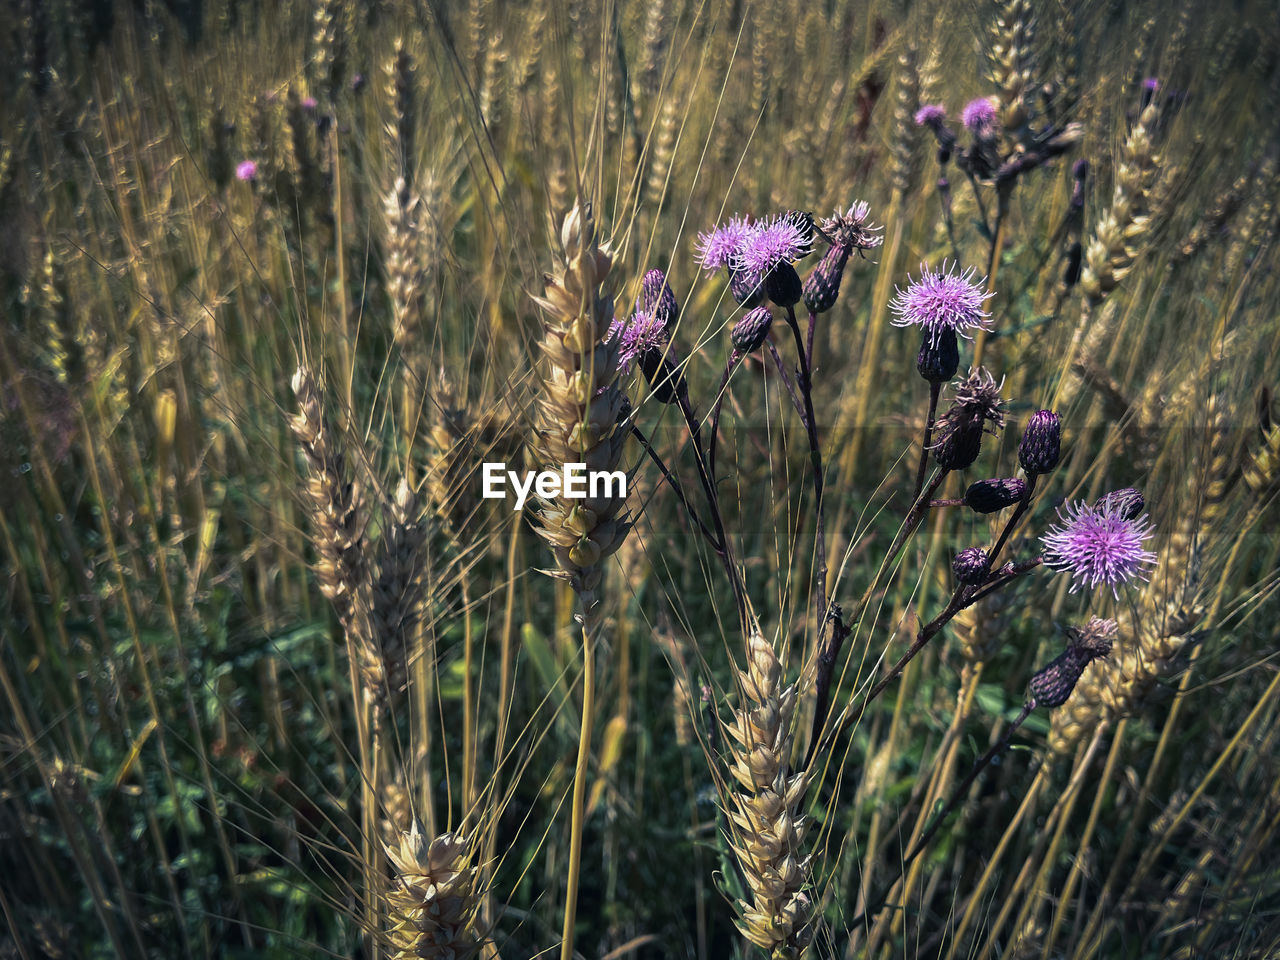 plant, flower, flowering plant, growth, grass, beauty in nature, nature, prairie, purple, land, field, freshness, lavender, no people, fragility, close-up, day, outdoors, meadow, sunlight, tranquility, focus on foreground, wildflower, plant stem, agriculture, flower head, botany, inflorescence, landscape